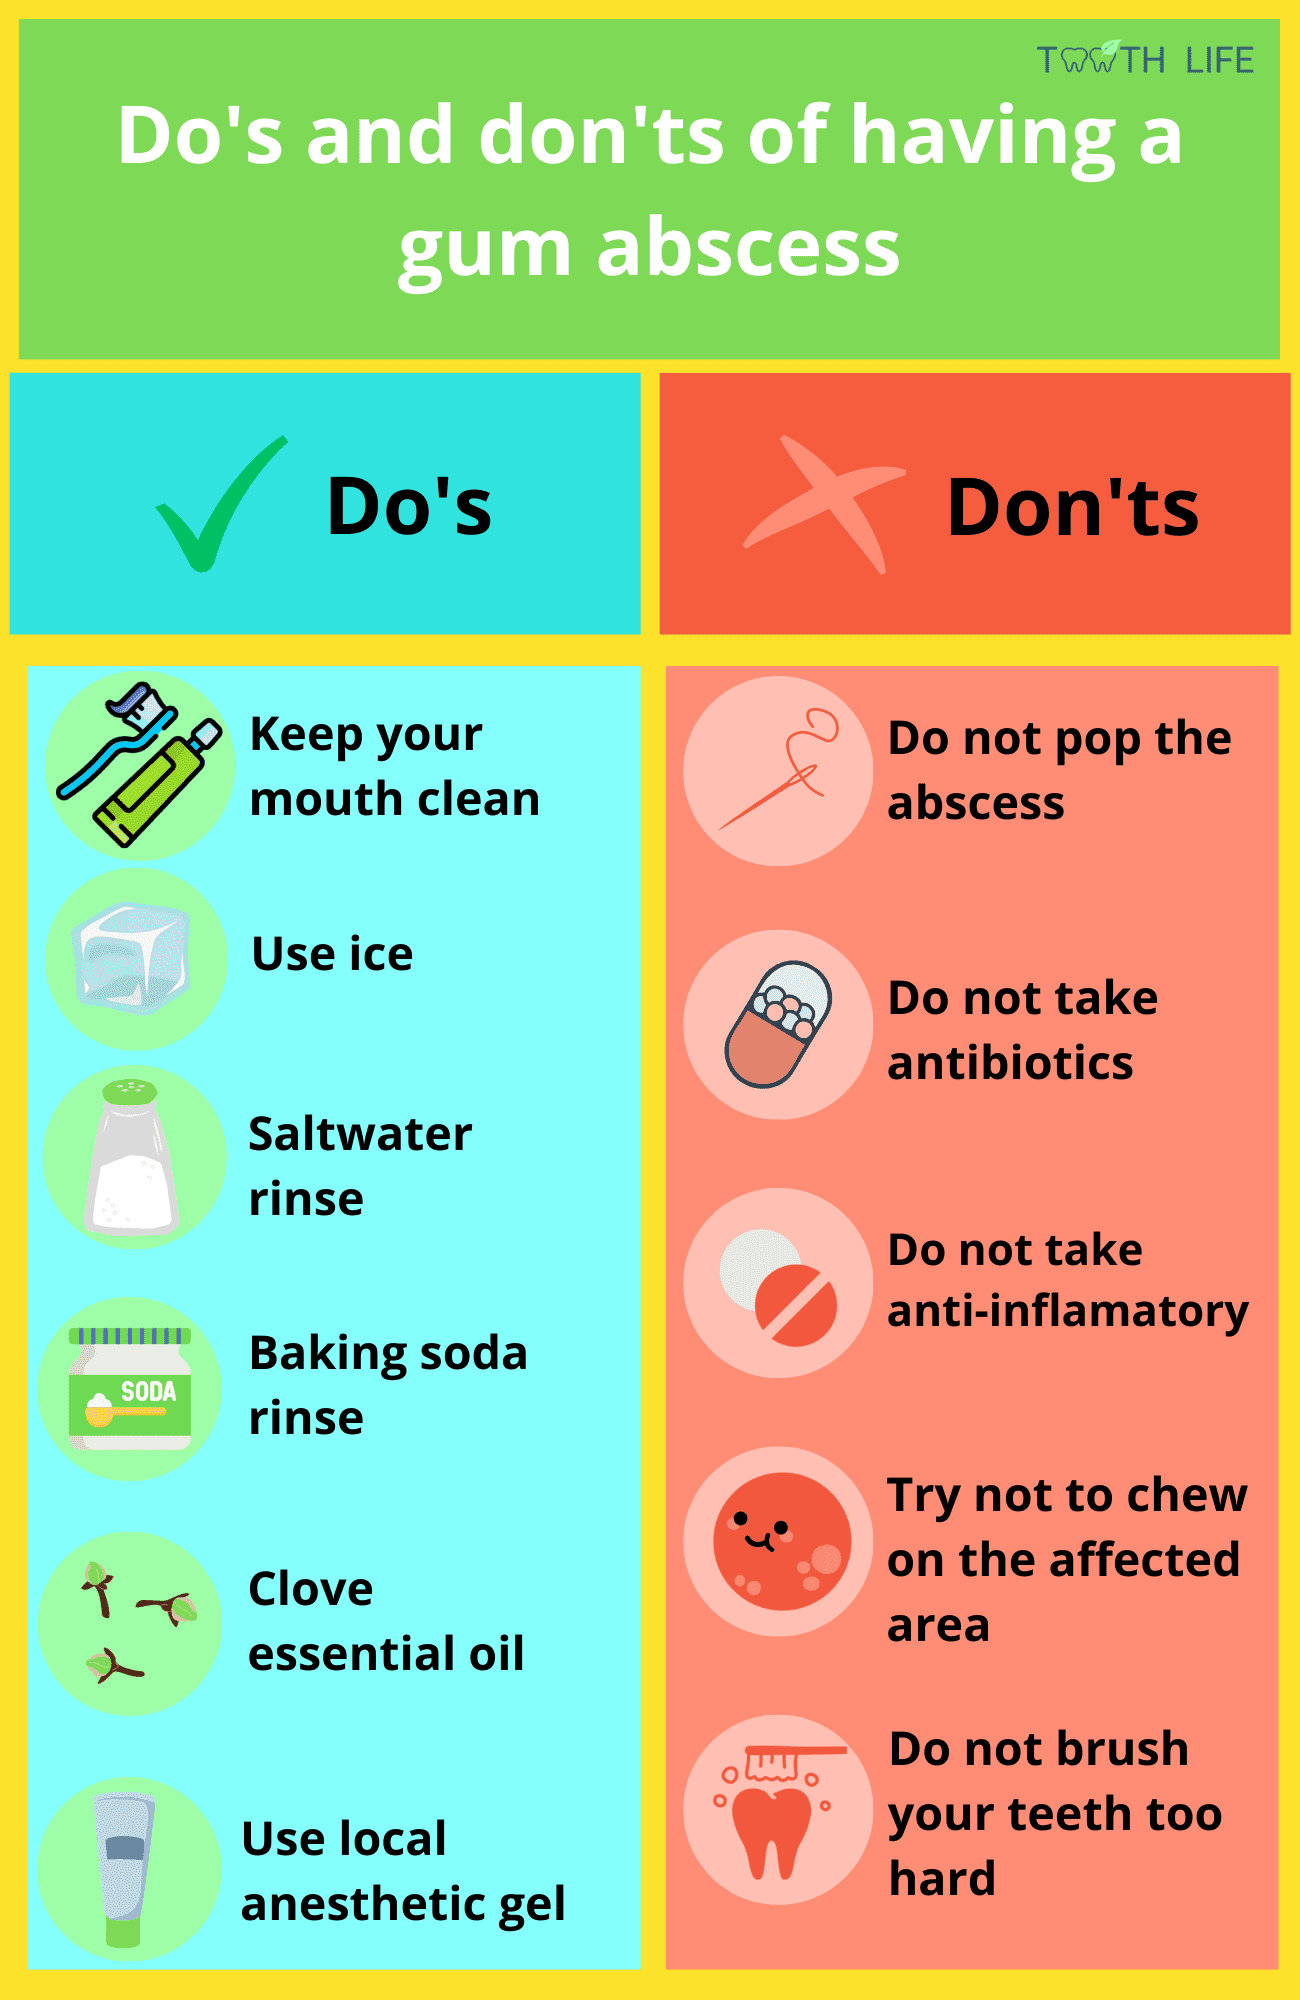 Do's and don'ts of having a gum abscess